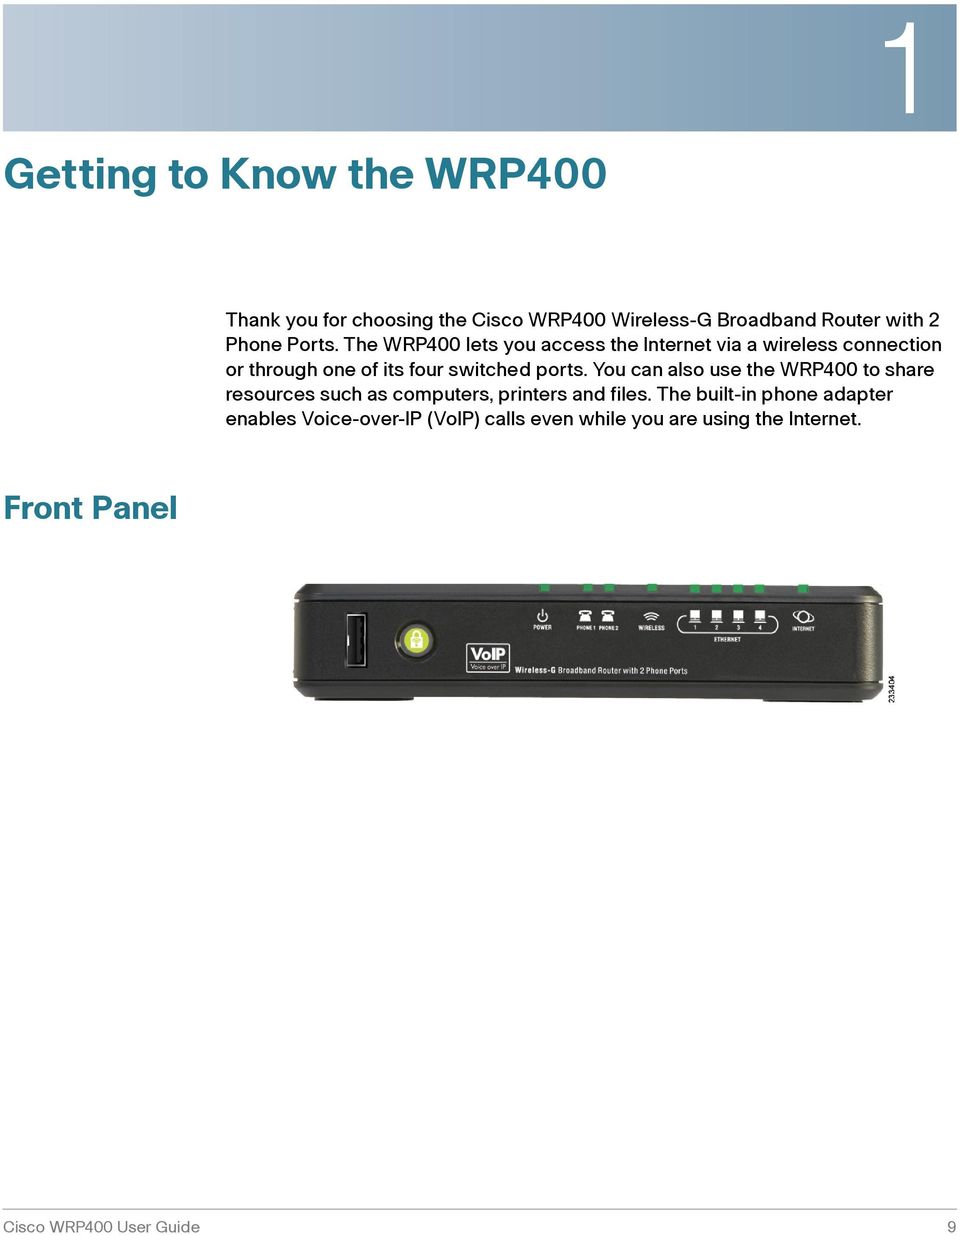 The WRP400 lets you access the Internet via a wireless connection or through one of its four switched ports.